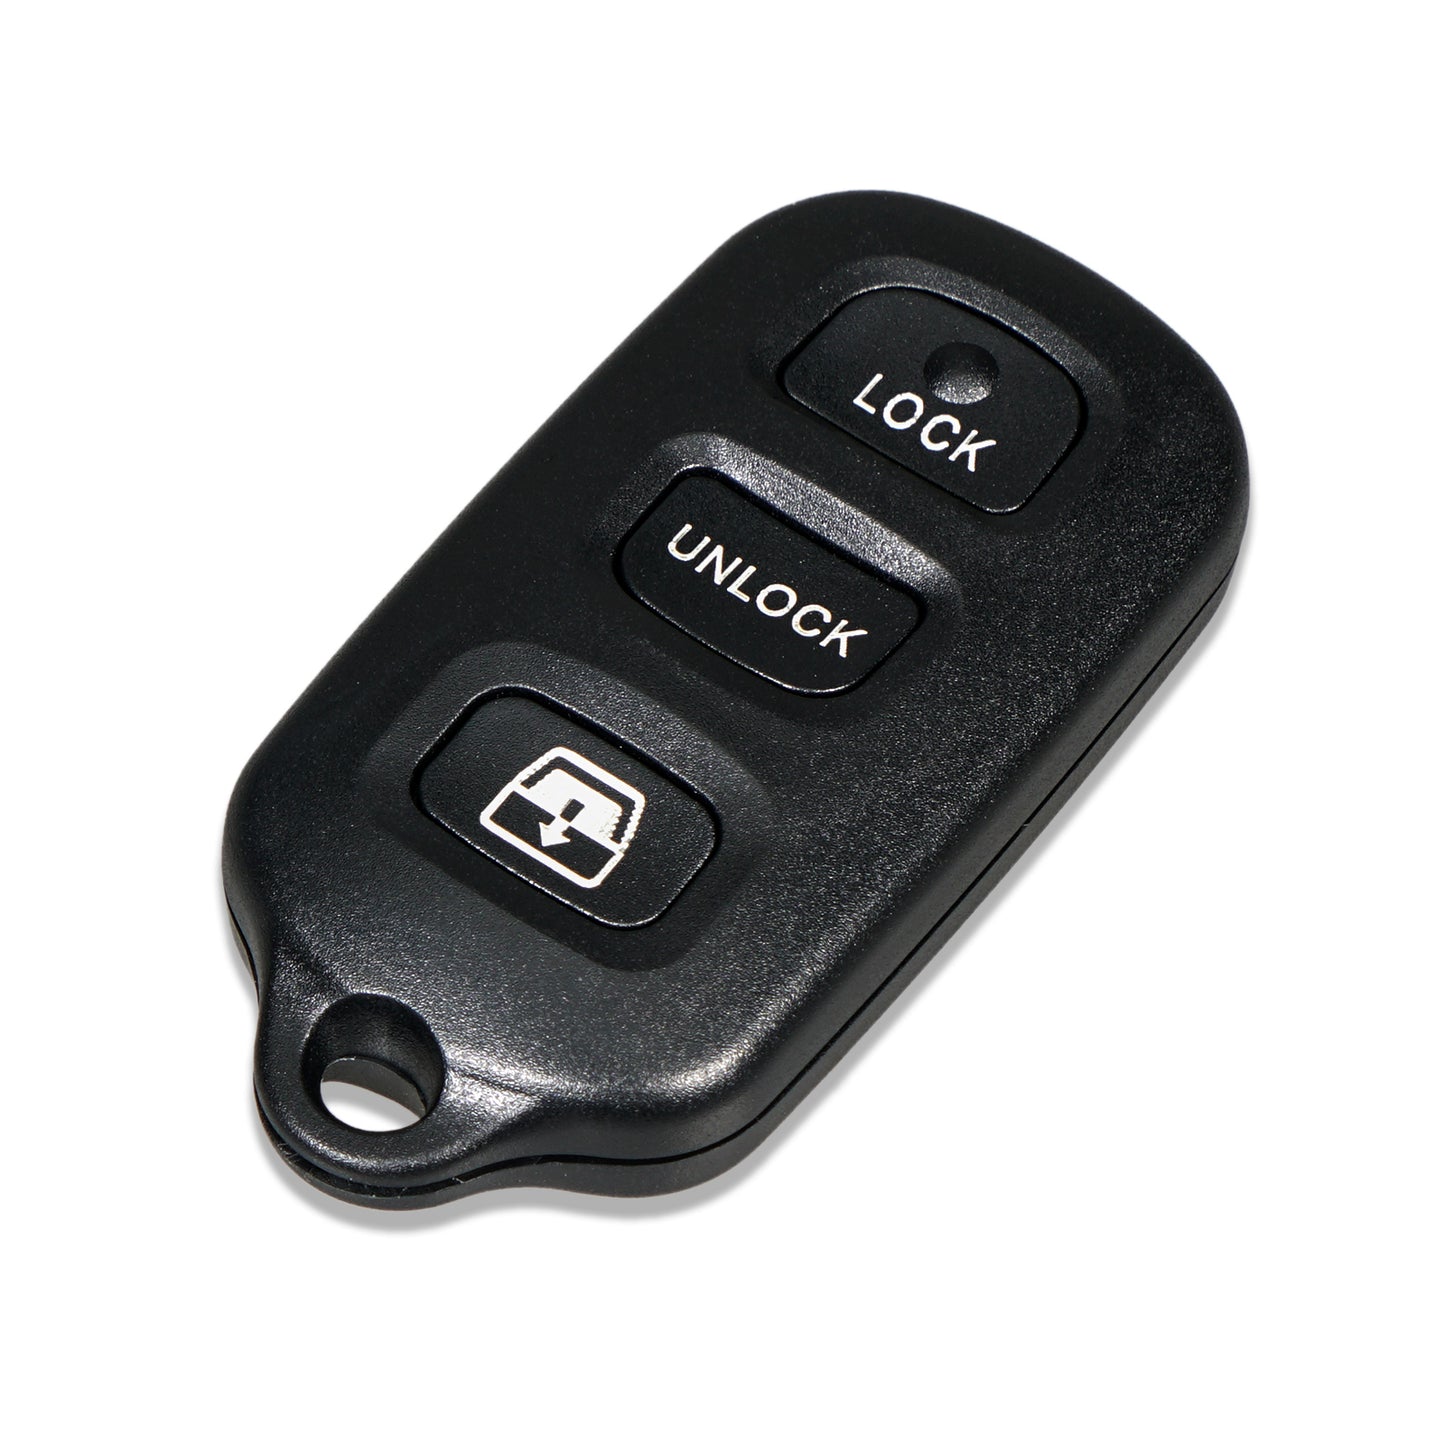 4 Buttons 314MHz Keyless Entry Fob Remote Car Key For 1999-2009 Toyota 4Runner (without red LED on original remote) Sequoia (without red LED on original remote)FCC ID: HYQ12BBX  HYQ12BAN HYQ1512Y SKU : J72